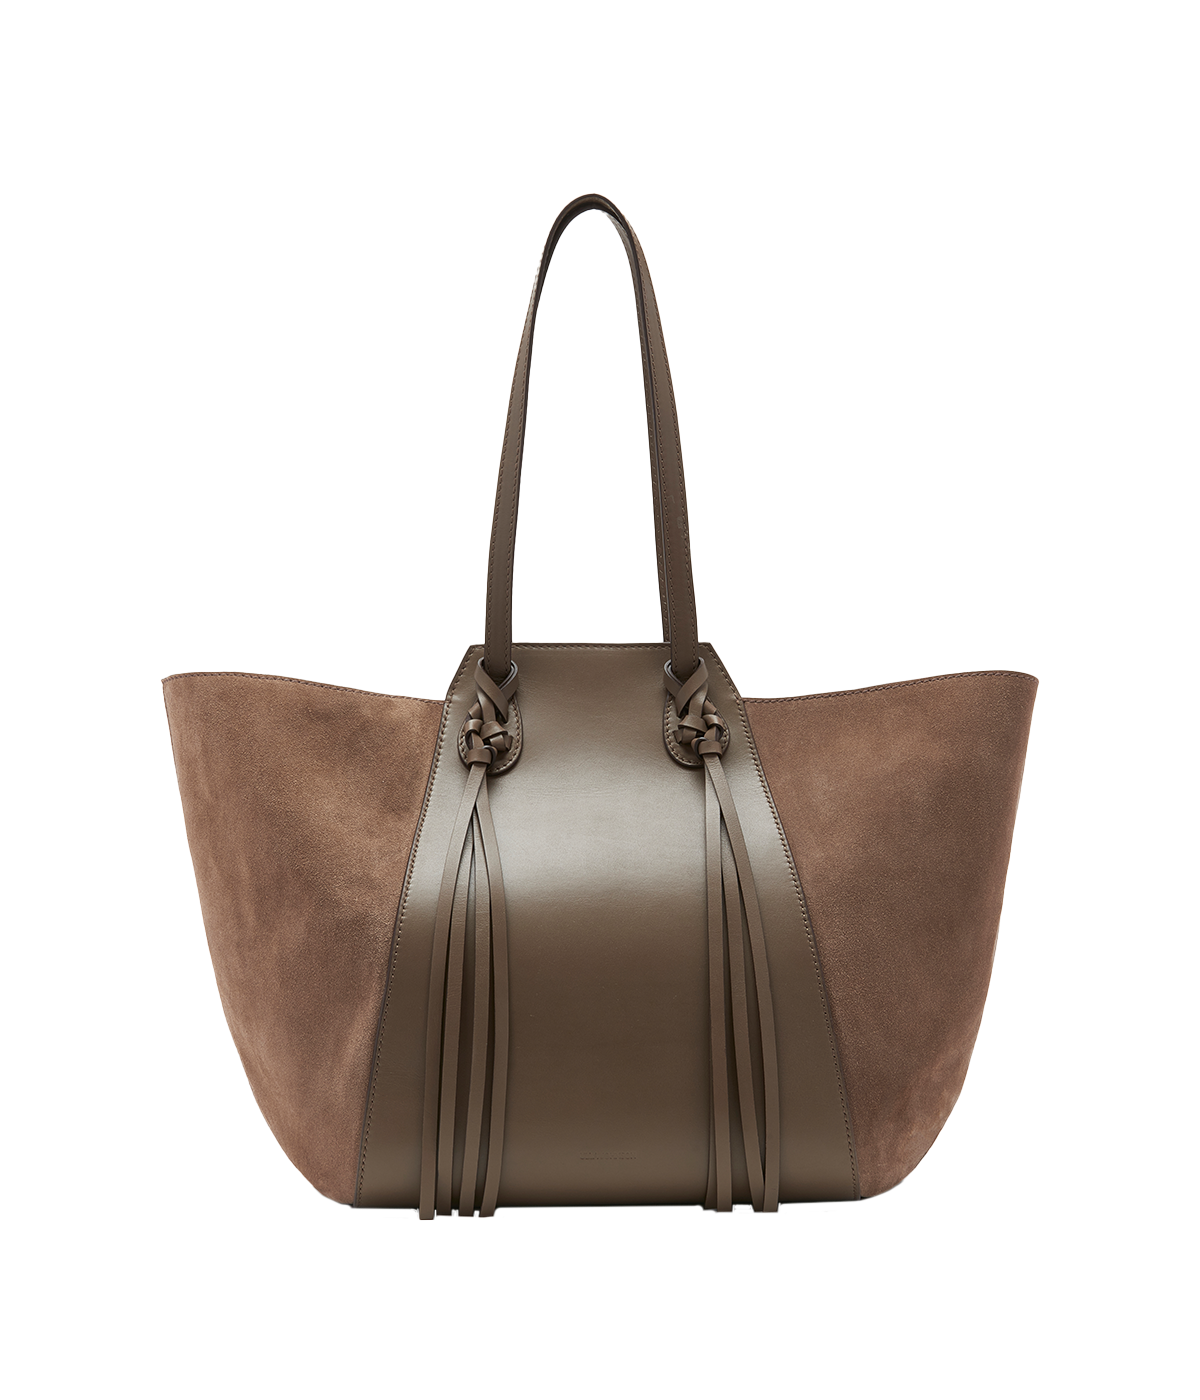 Imogen Large Carryall Tote in Mica